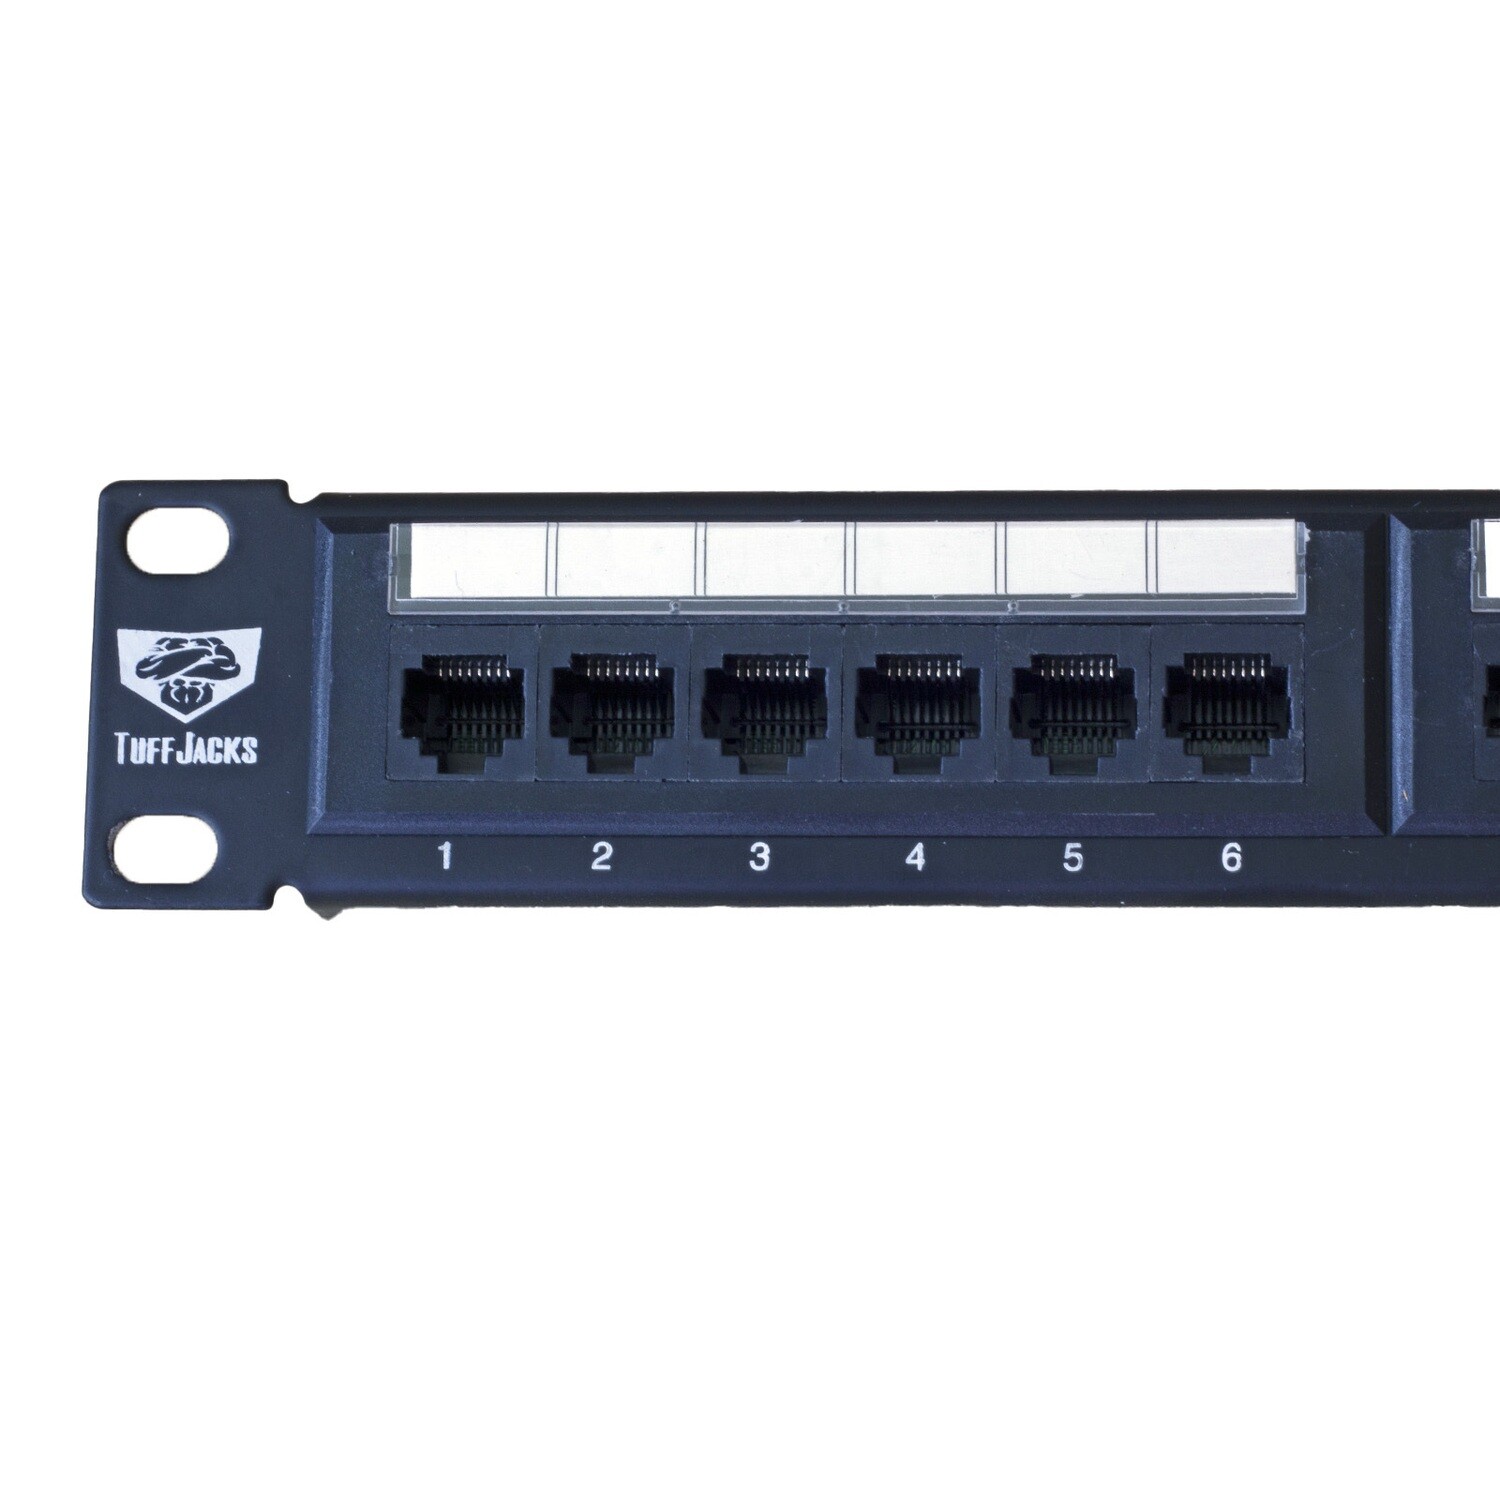 24 Port Cat-5e Patch Panel with Wire Management Bar as Low as $18.00